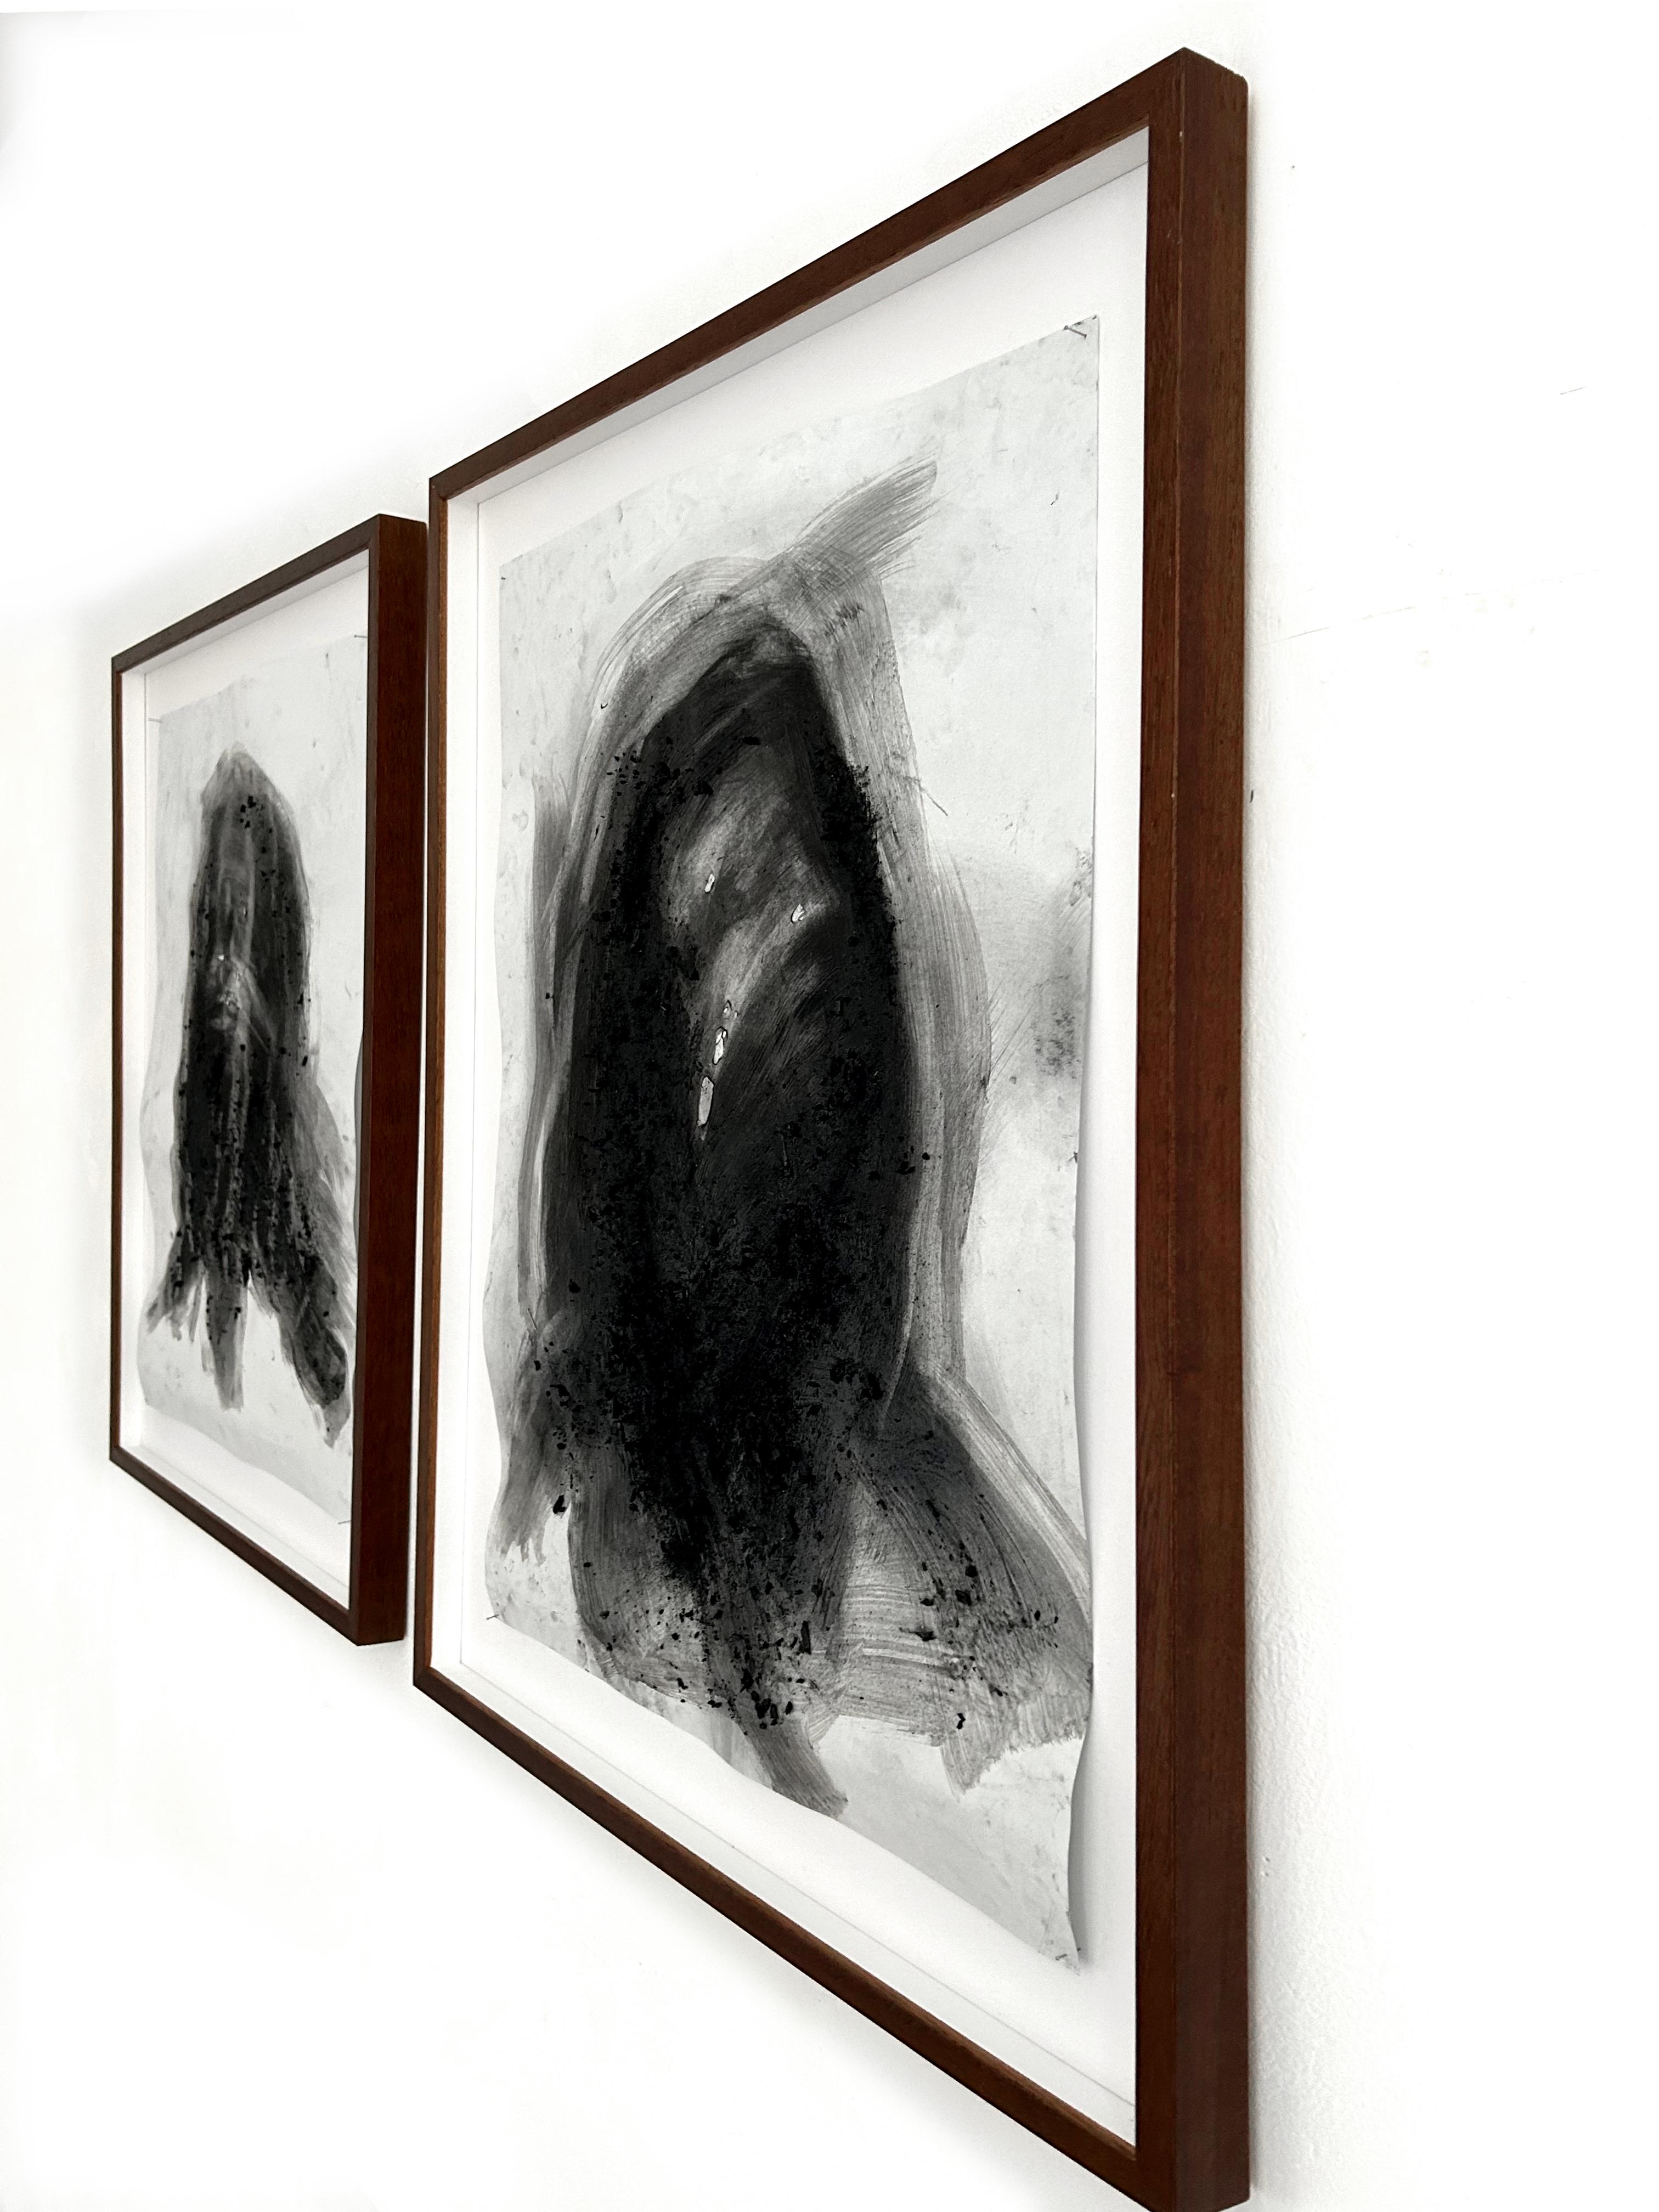 ‘The Light Bringers’, 2023, is Latex and charcoal work, have the quality of movement, the heads turning and twisting, as if in prayer. These series of 6 works are almost biblical, tremendously emotive, thoughts in movement.

The exhibition is the